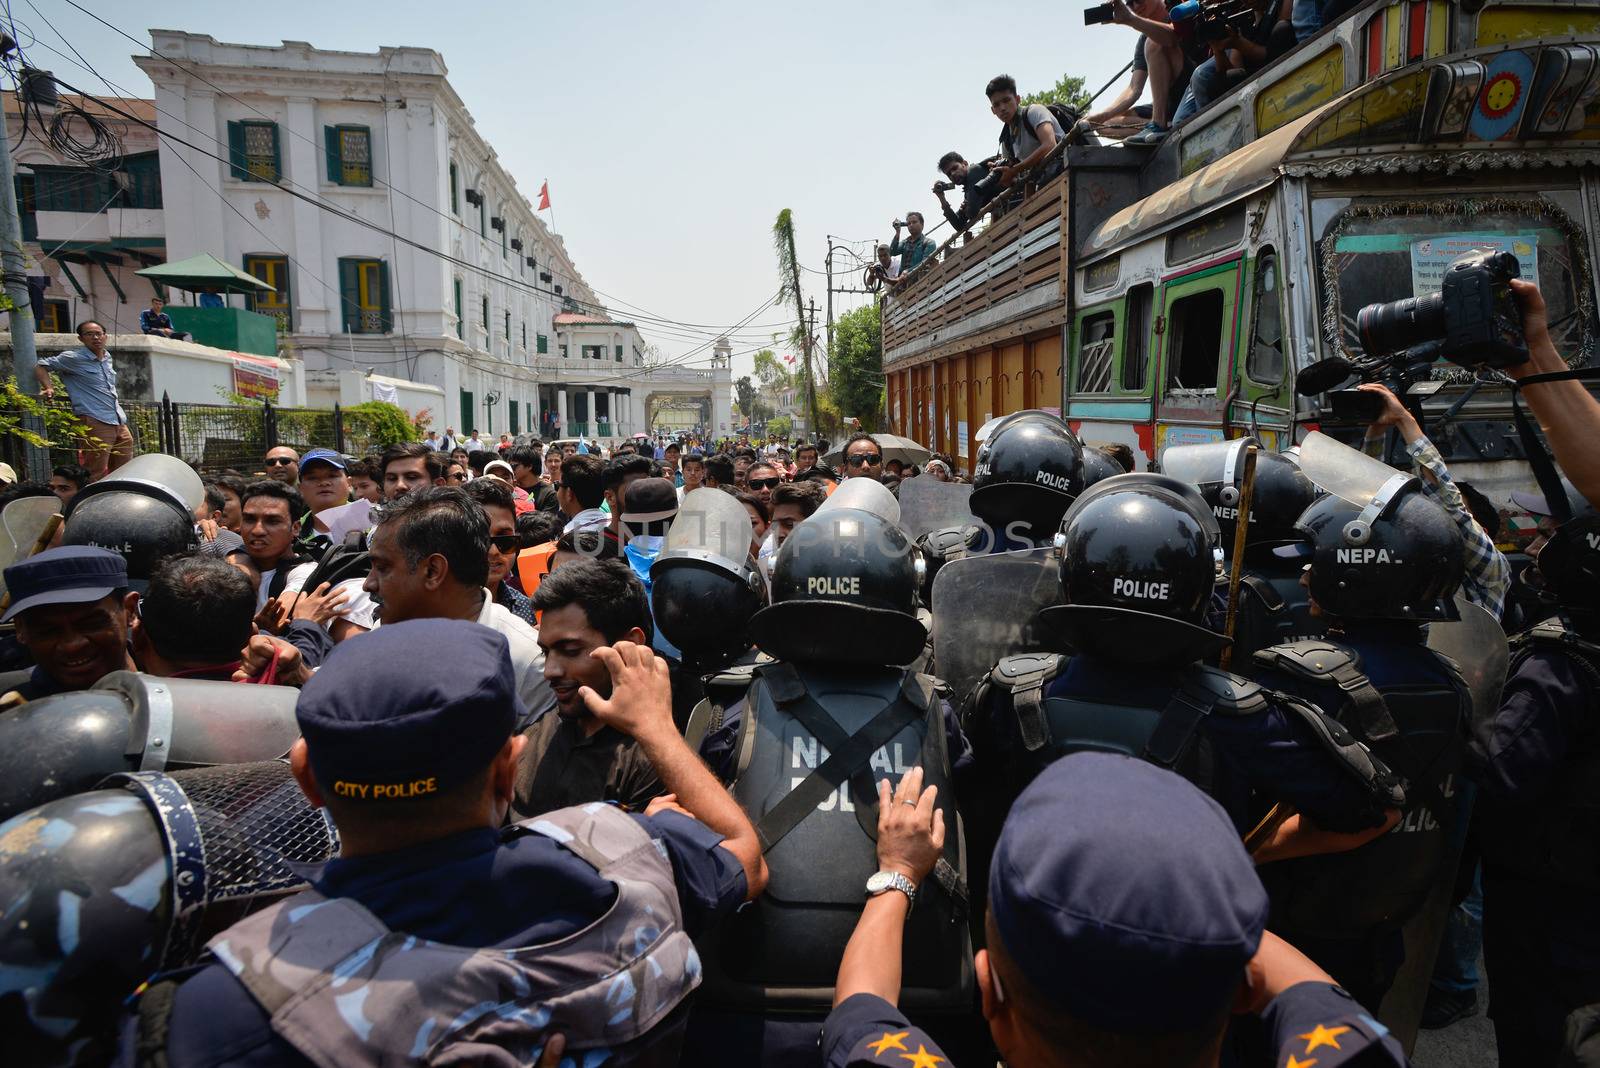 NEPAL, Kathmandu: Nepalese police push back demonstrators protesting against delayed government reconstruction efforts in Kathmandu on April 24, 2016, a year after a devastating earthquake. Nepal held memorial services on April 24 for the thousands killed in a massive earthquake one year ago, as victims still living in tents accused the government of failing them.